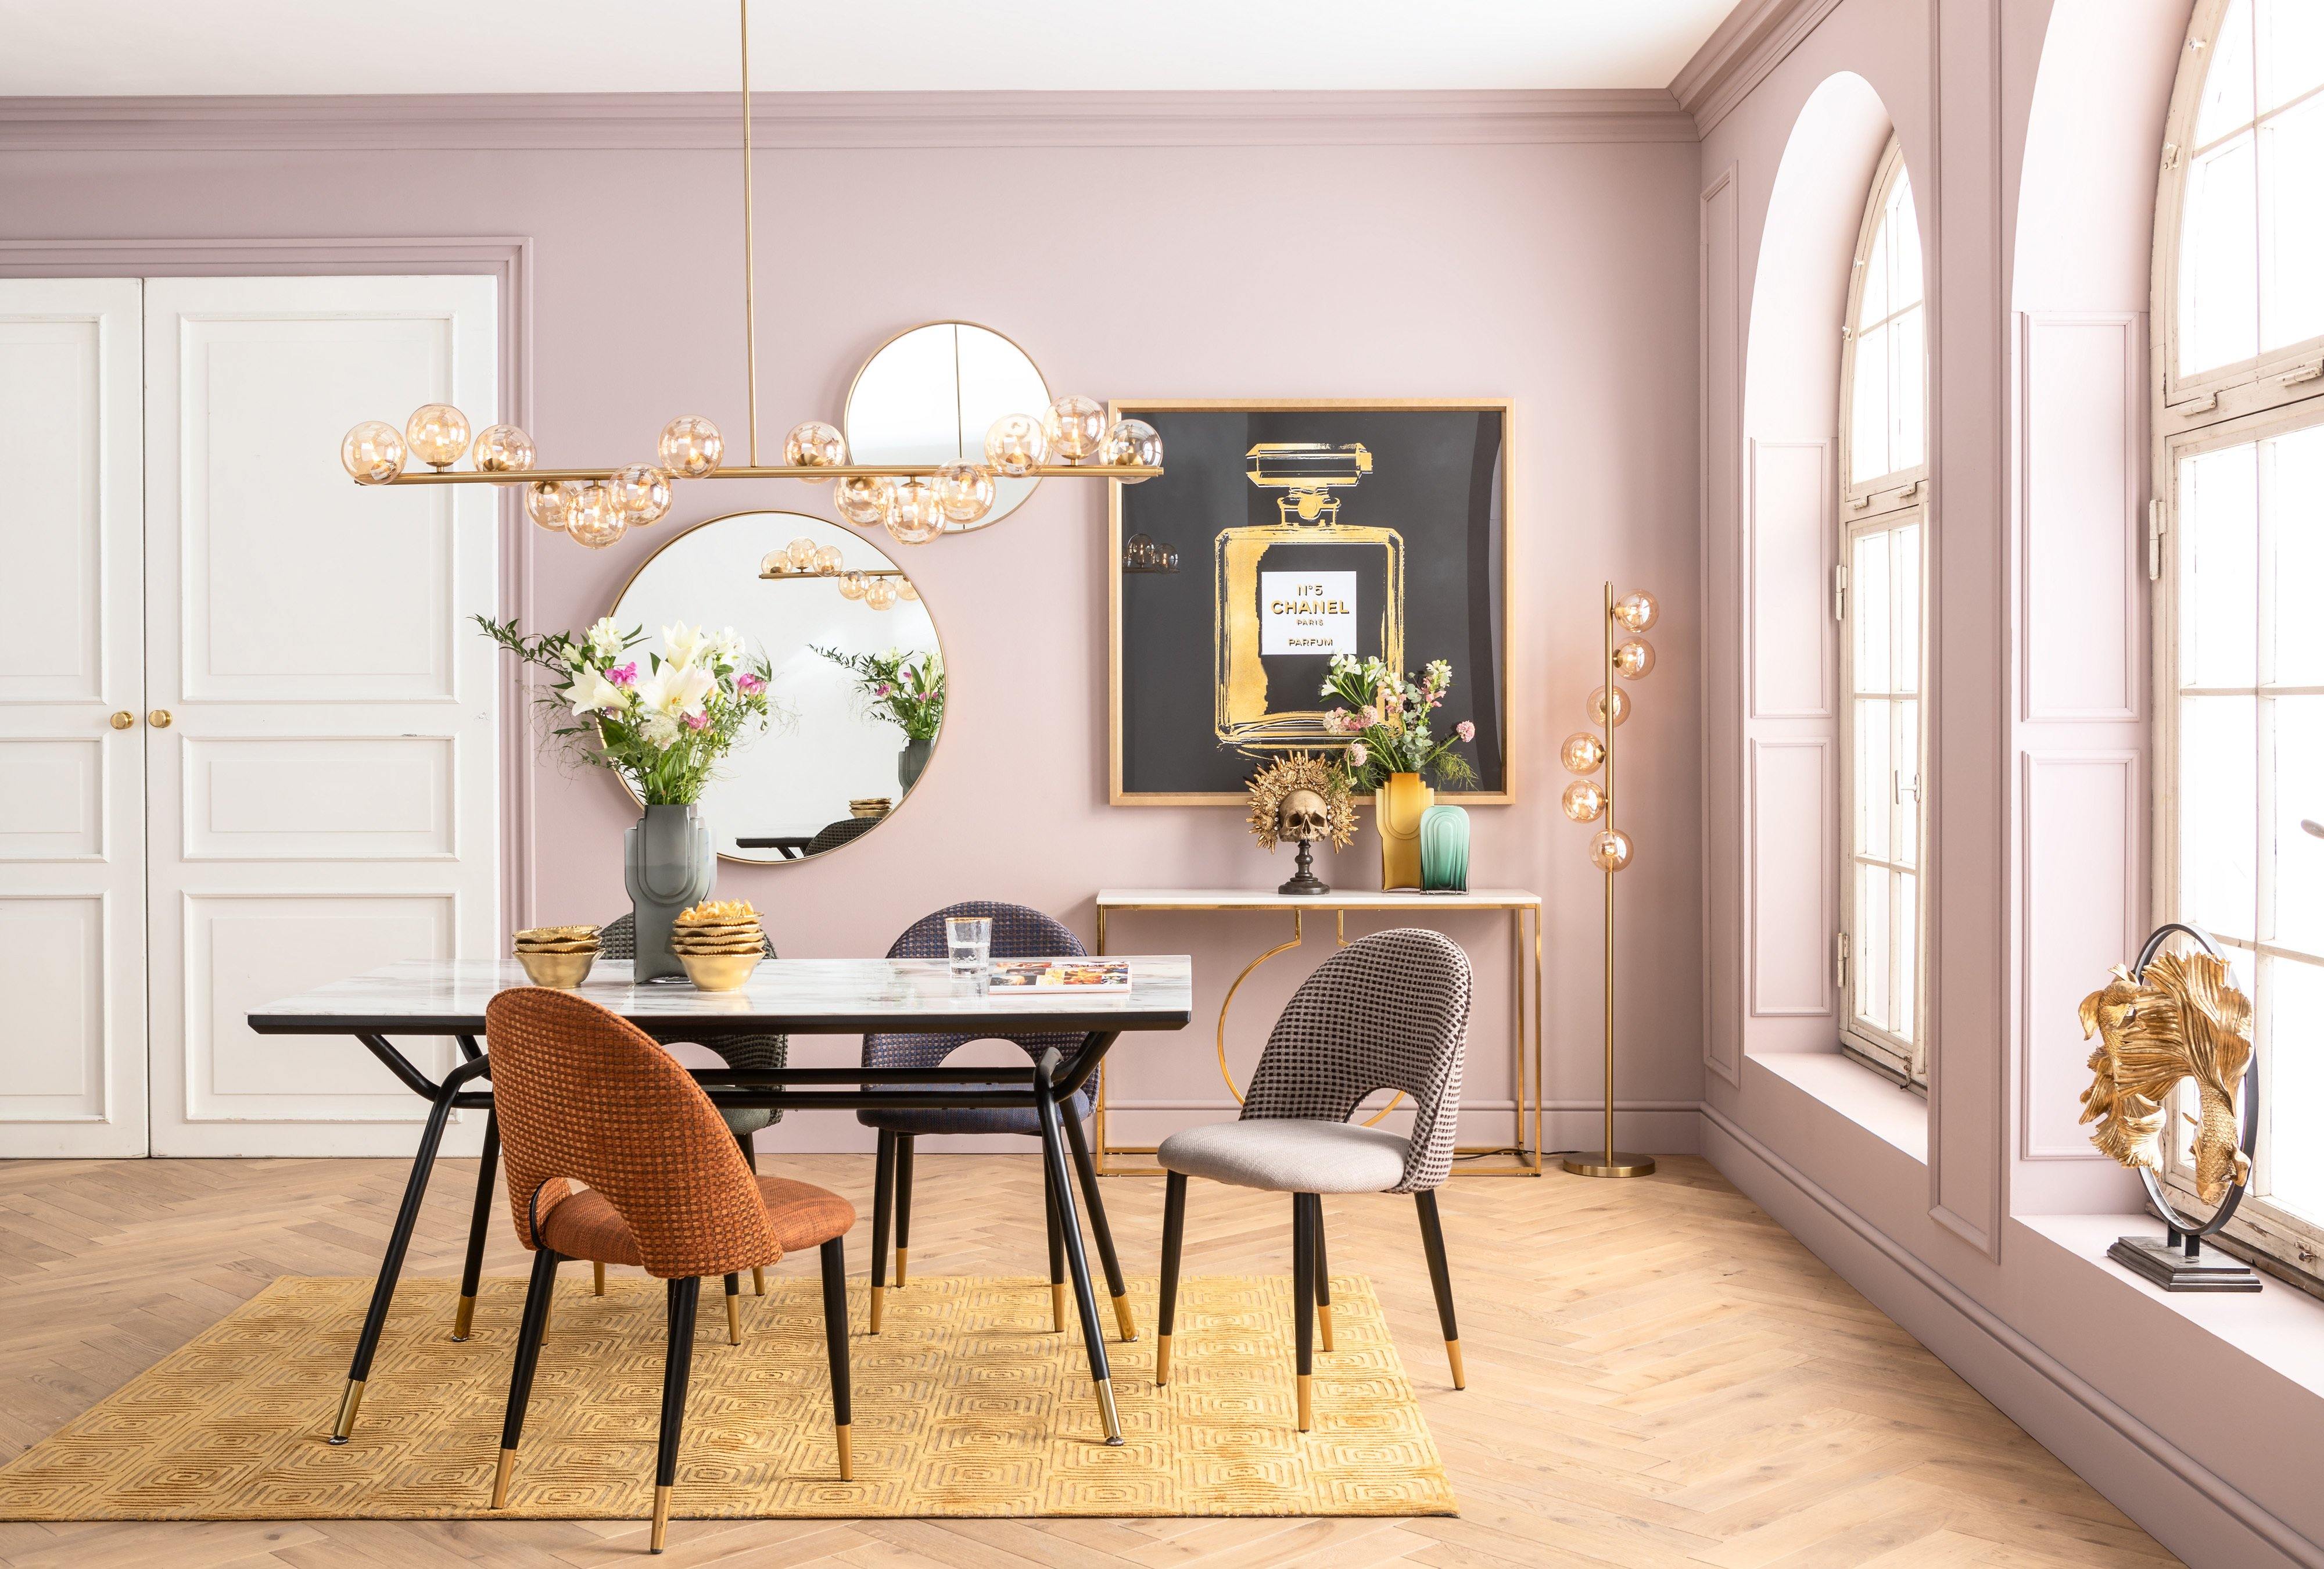 Dining room ideas for apartments: 11 ways to style a small dining space